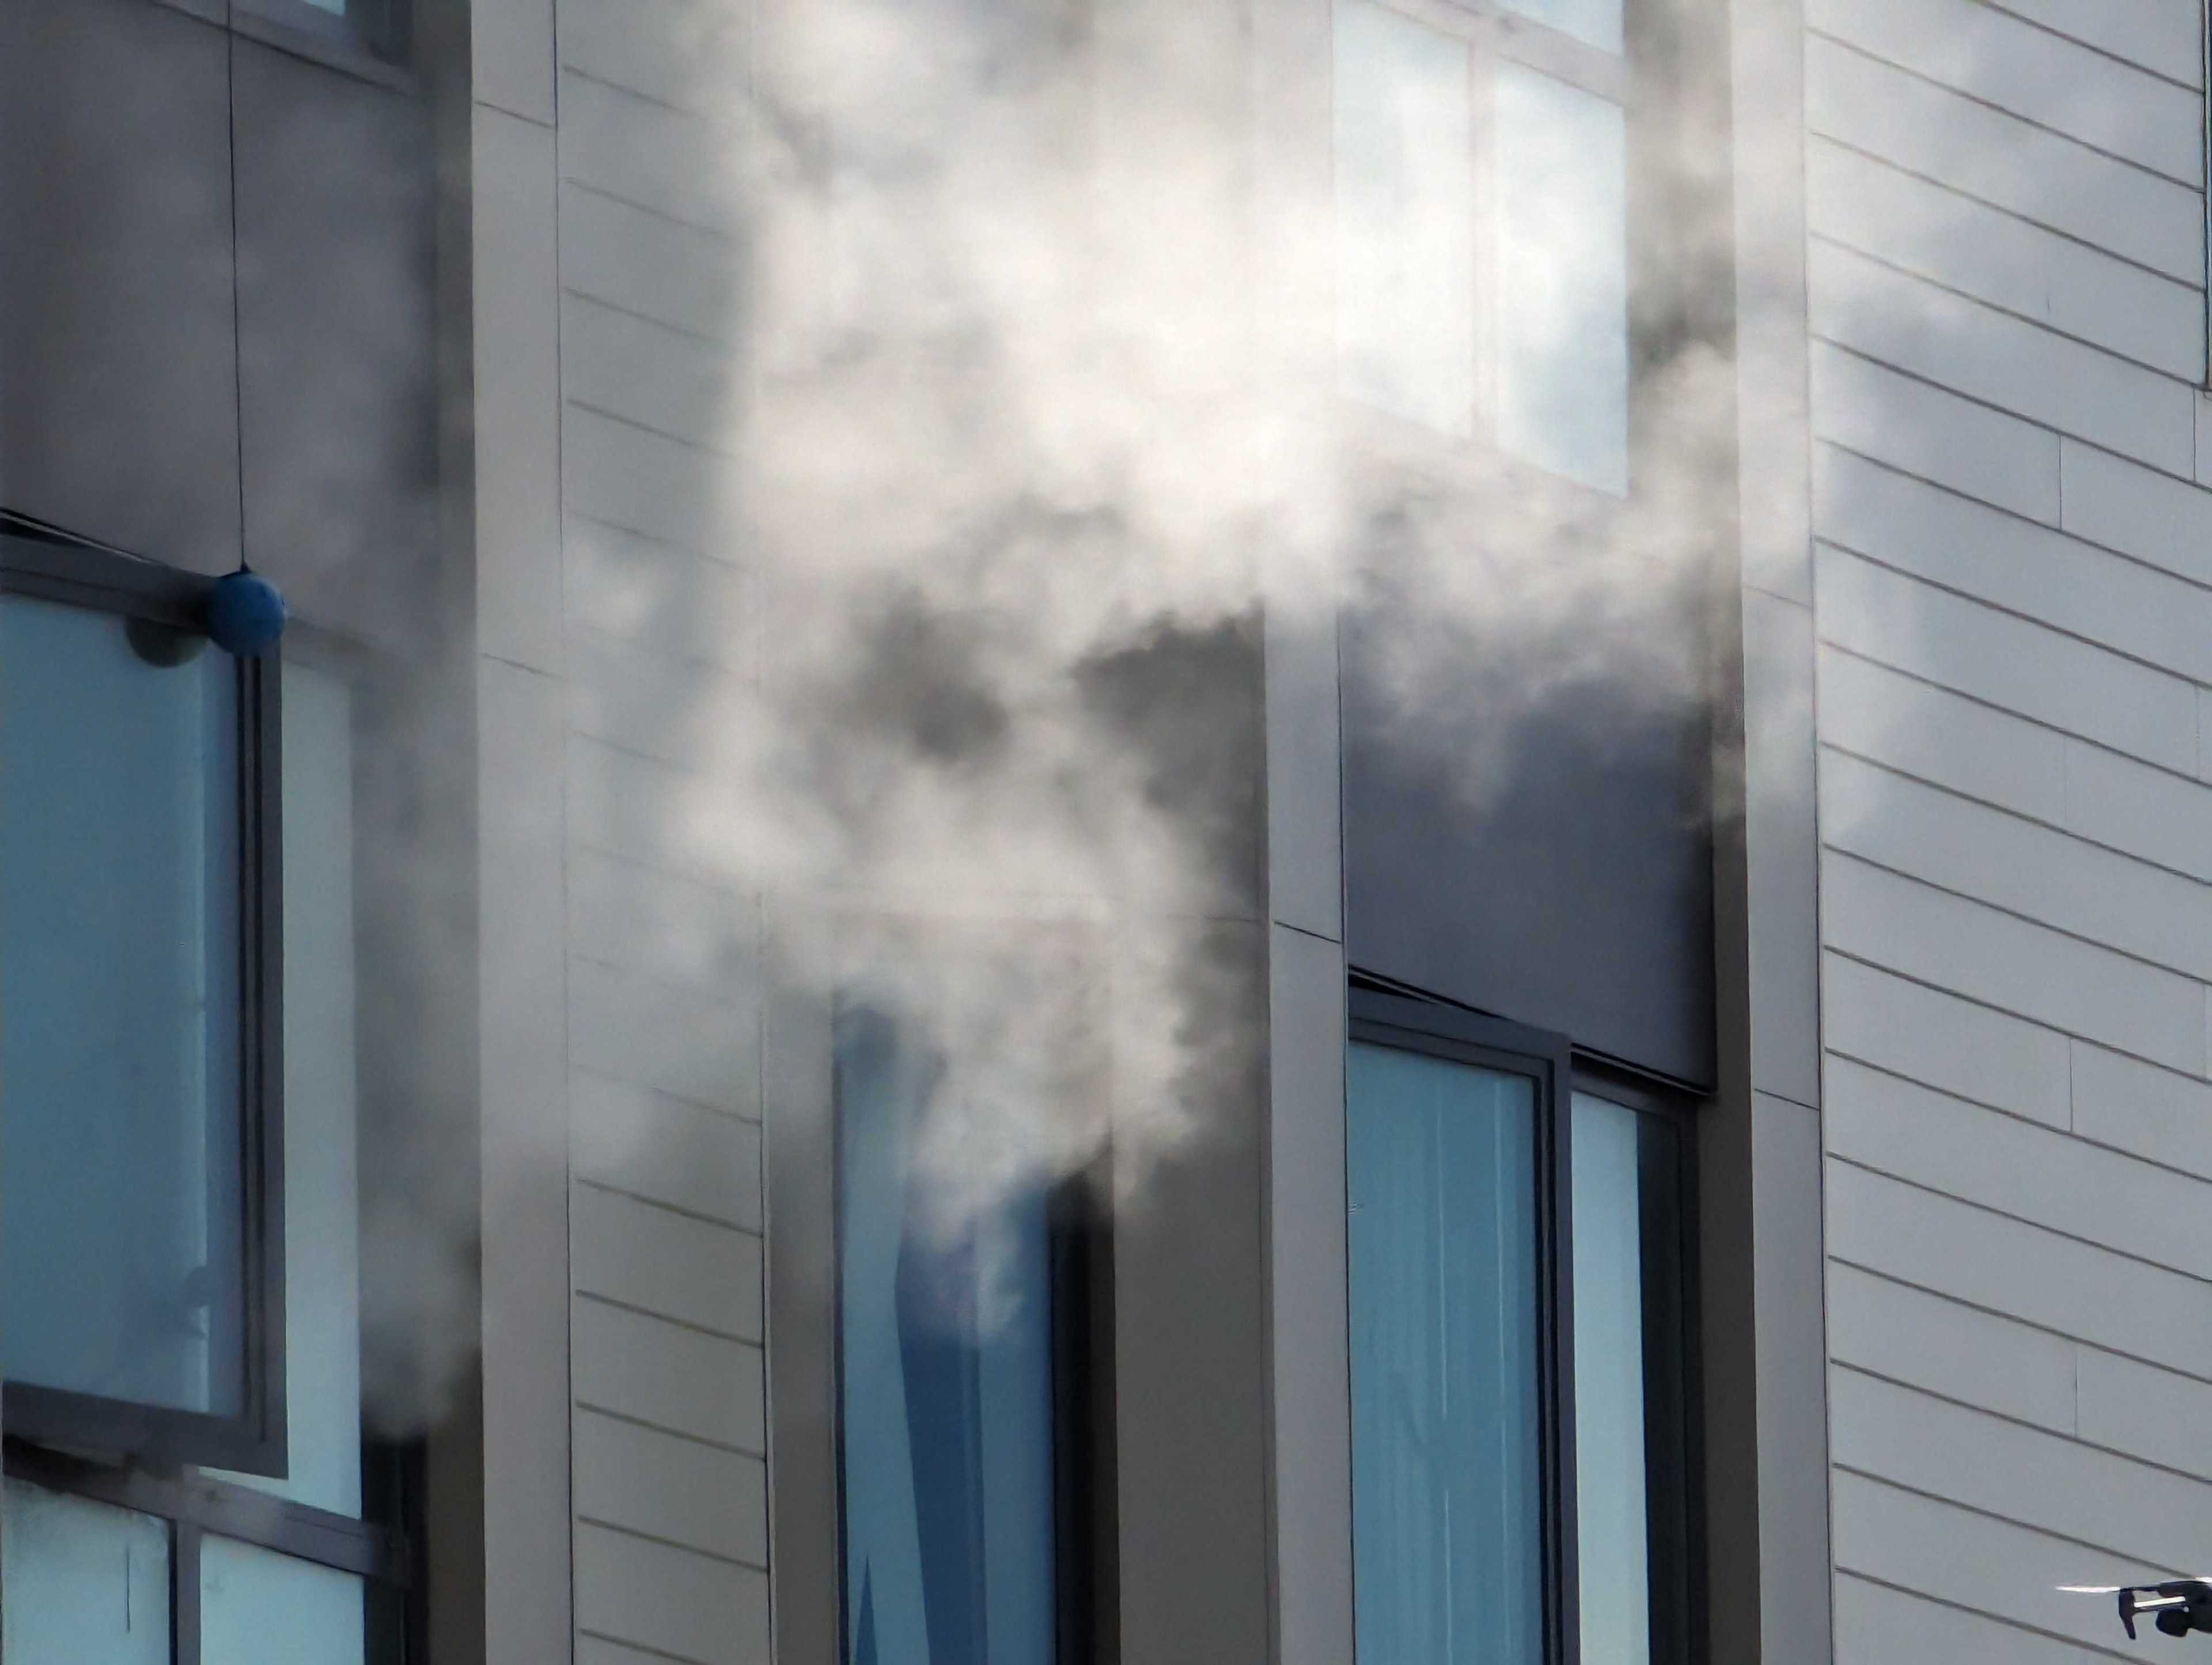 The image shows a building with light-colored siding and large windows emitting thick white smoke, suggesting a possible fire or exhaust issue.